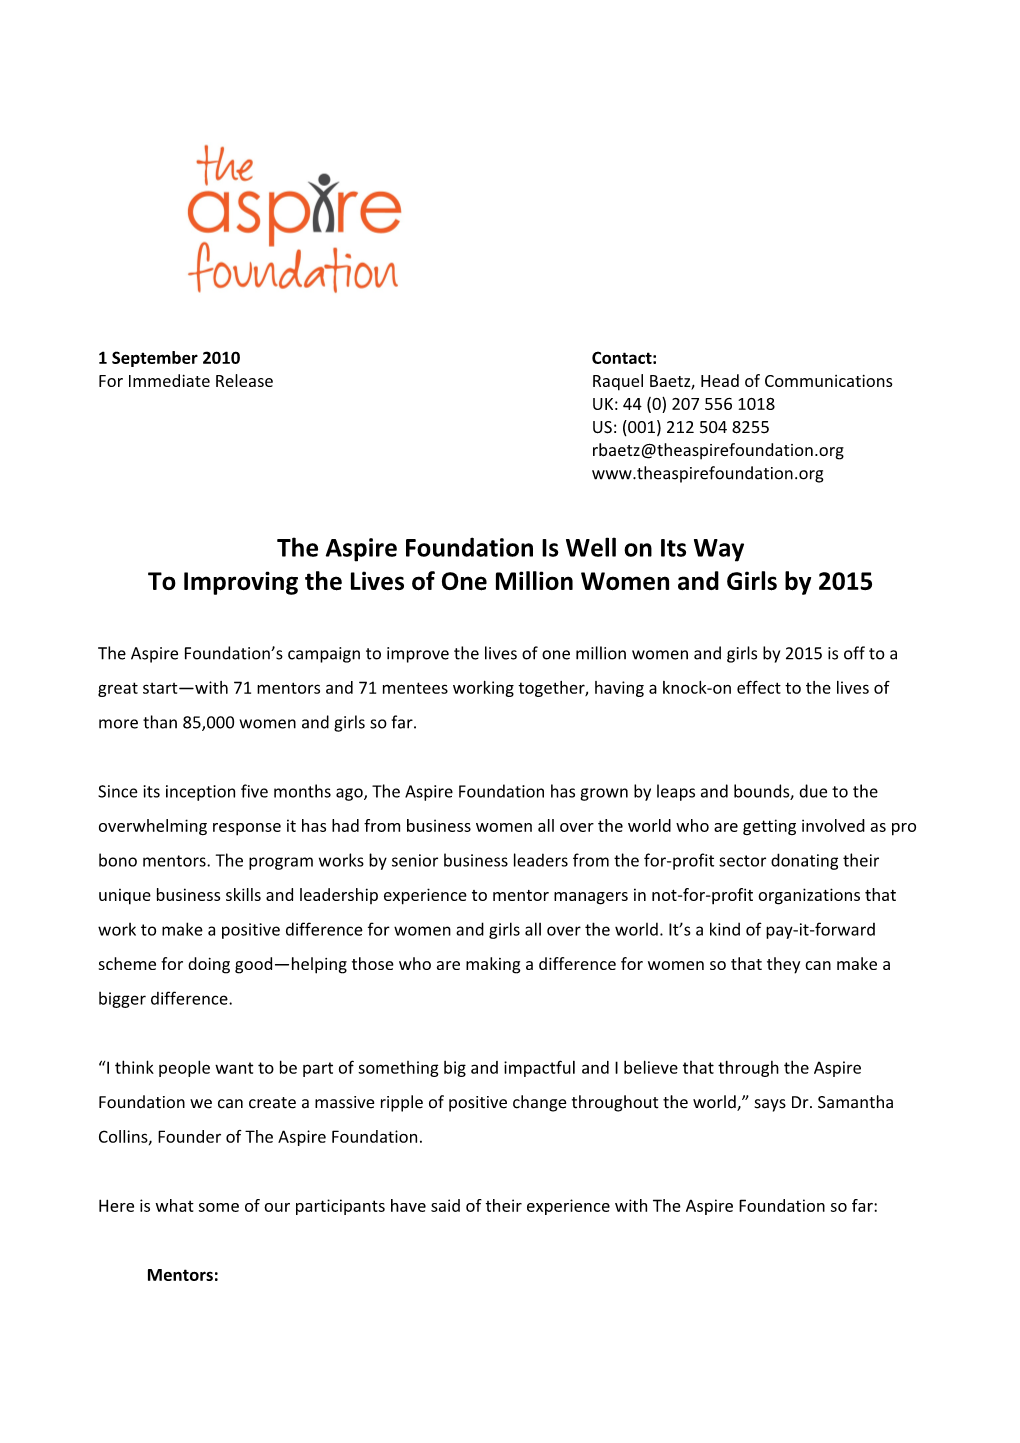 The Aspire Foundationis Well on Its Way